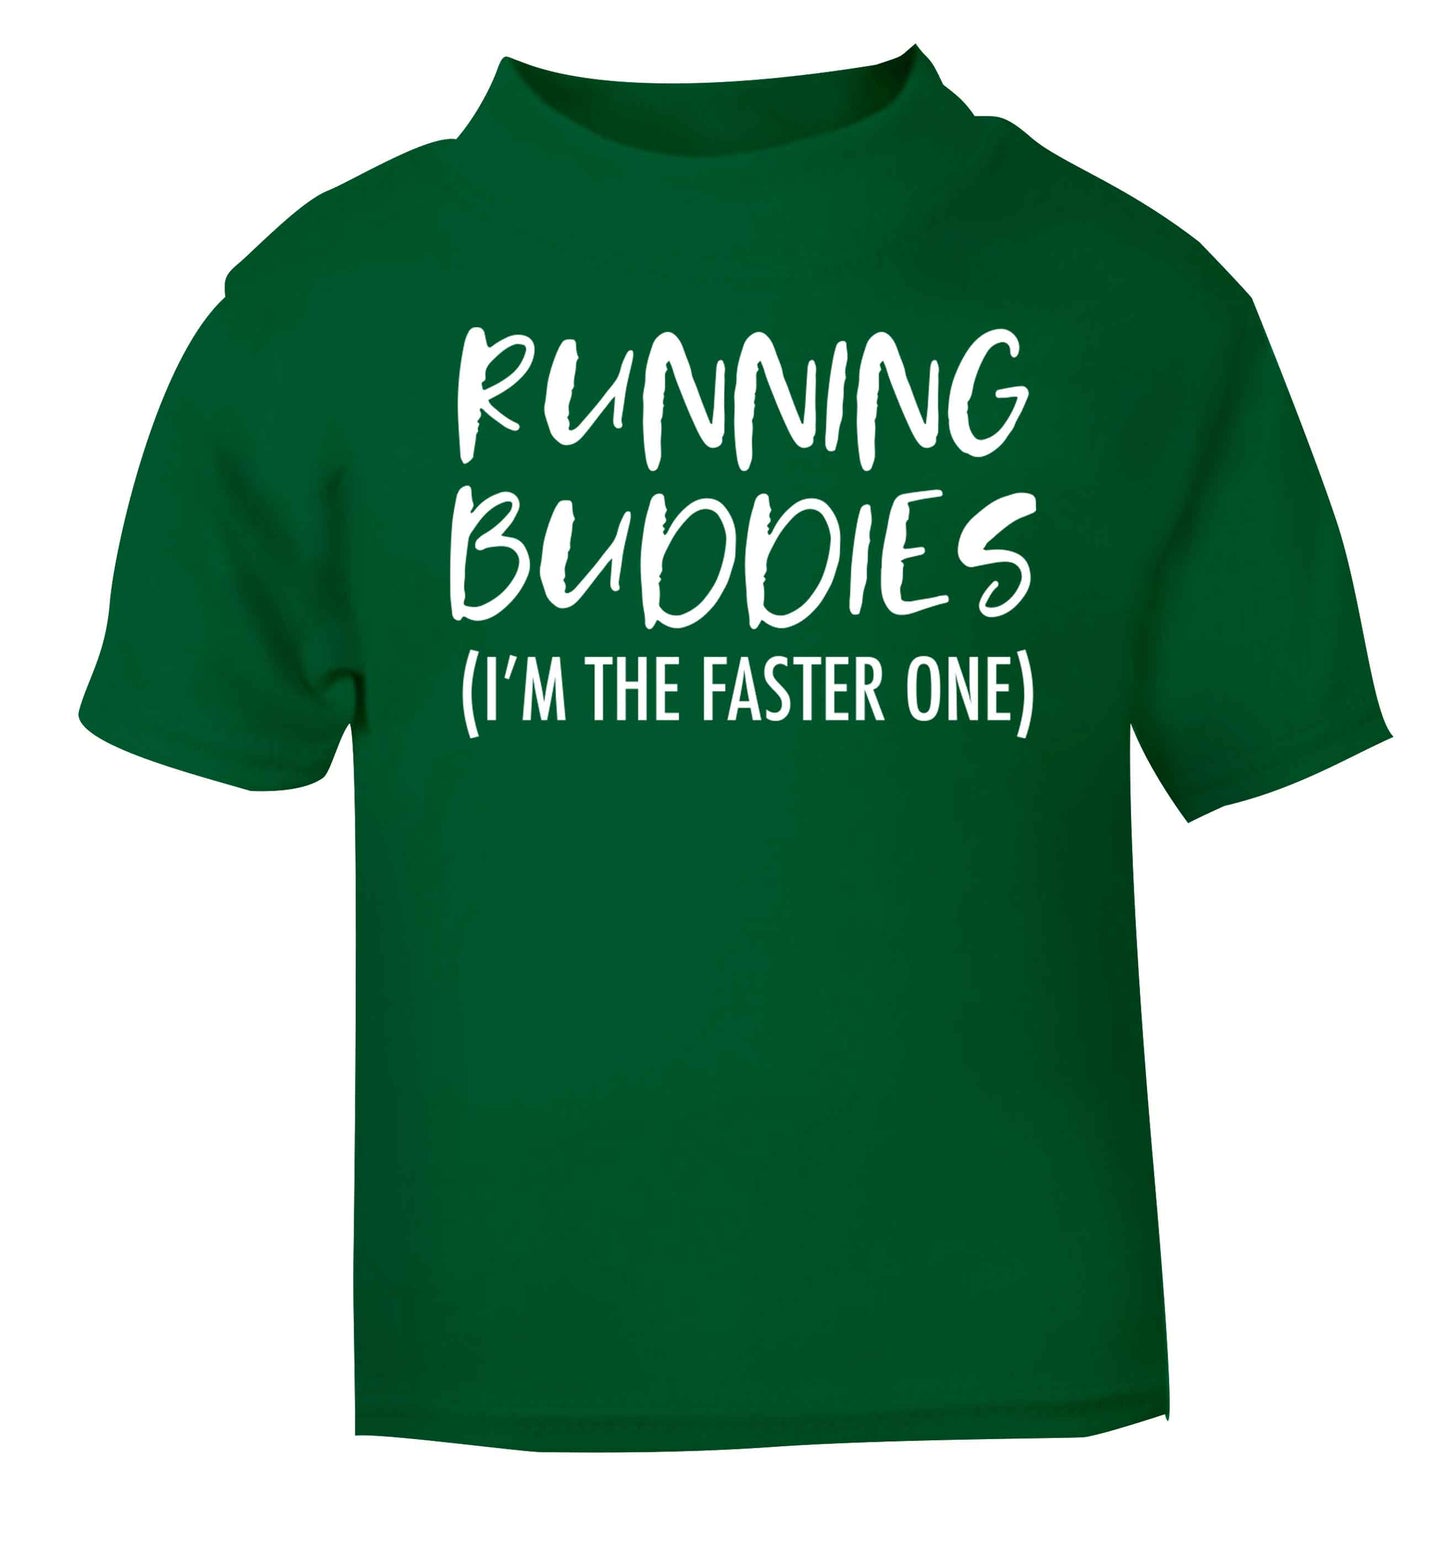 Running buddies (I'm the faster one) green baby toddler Tshirt 2 Years